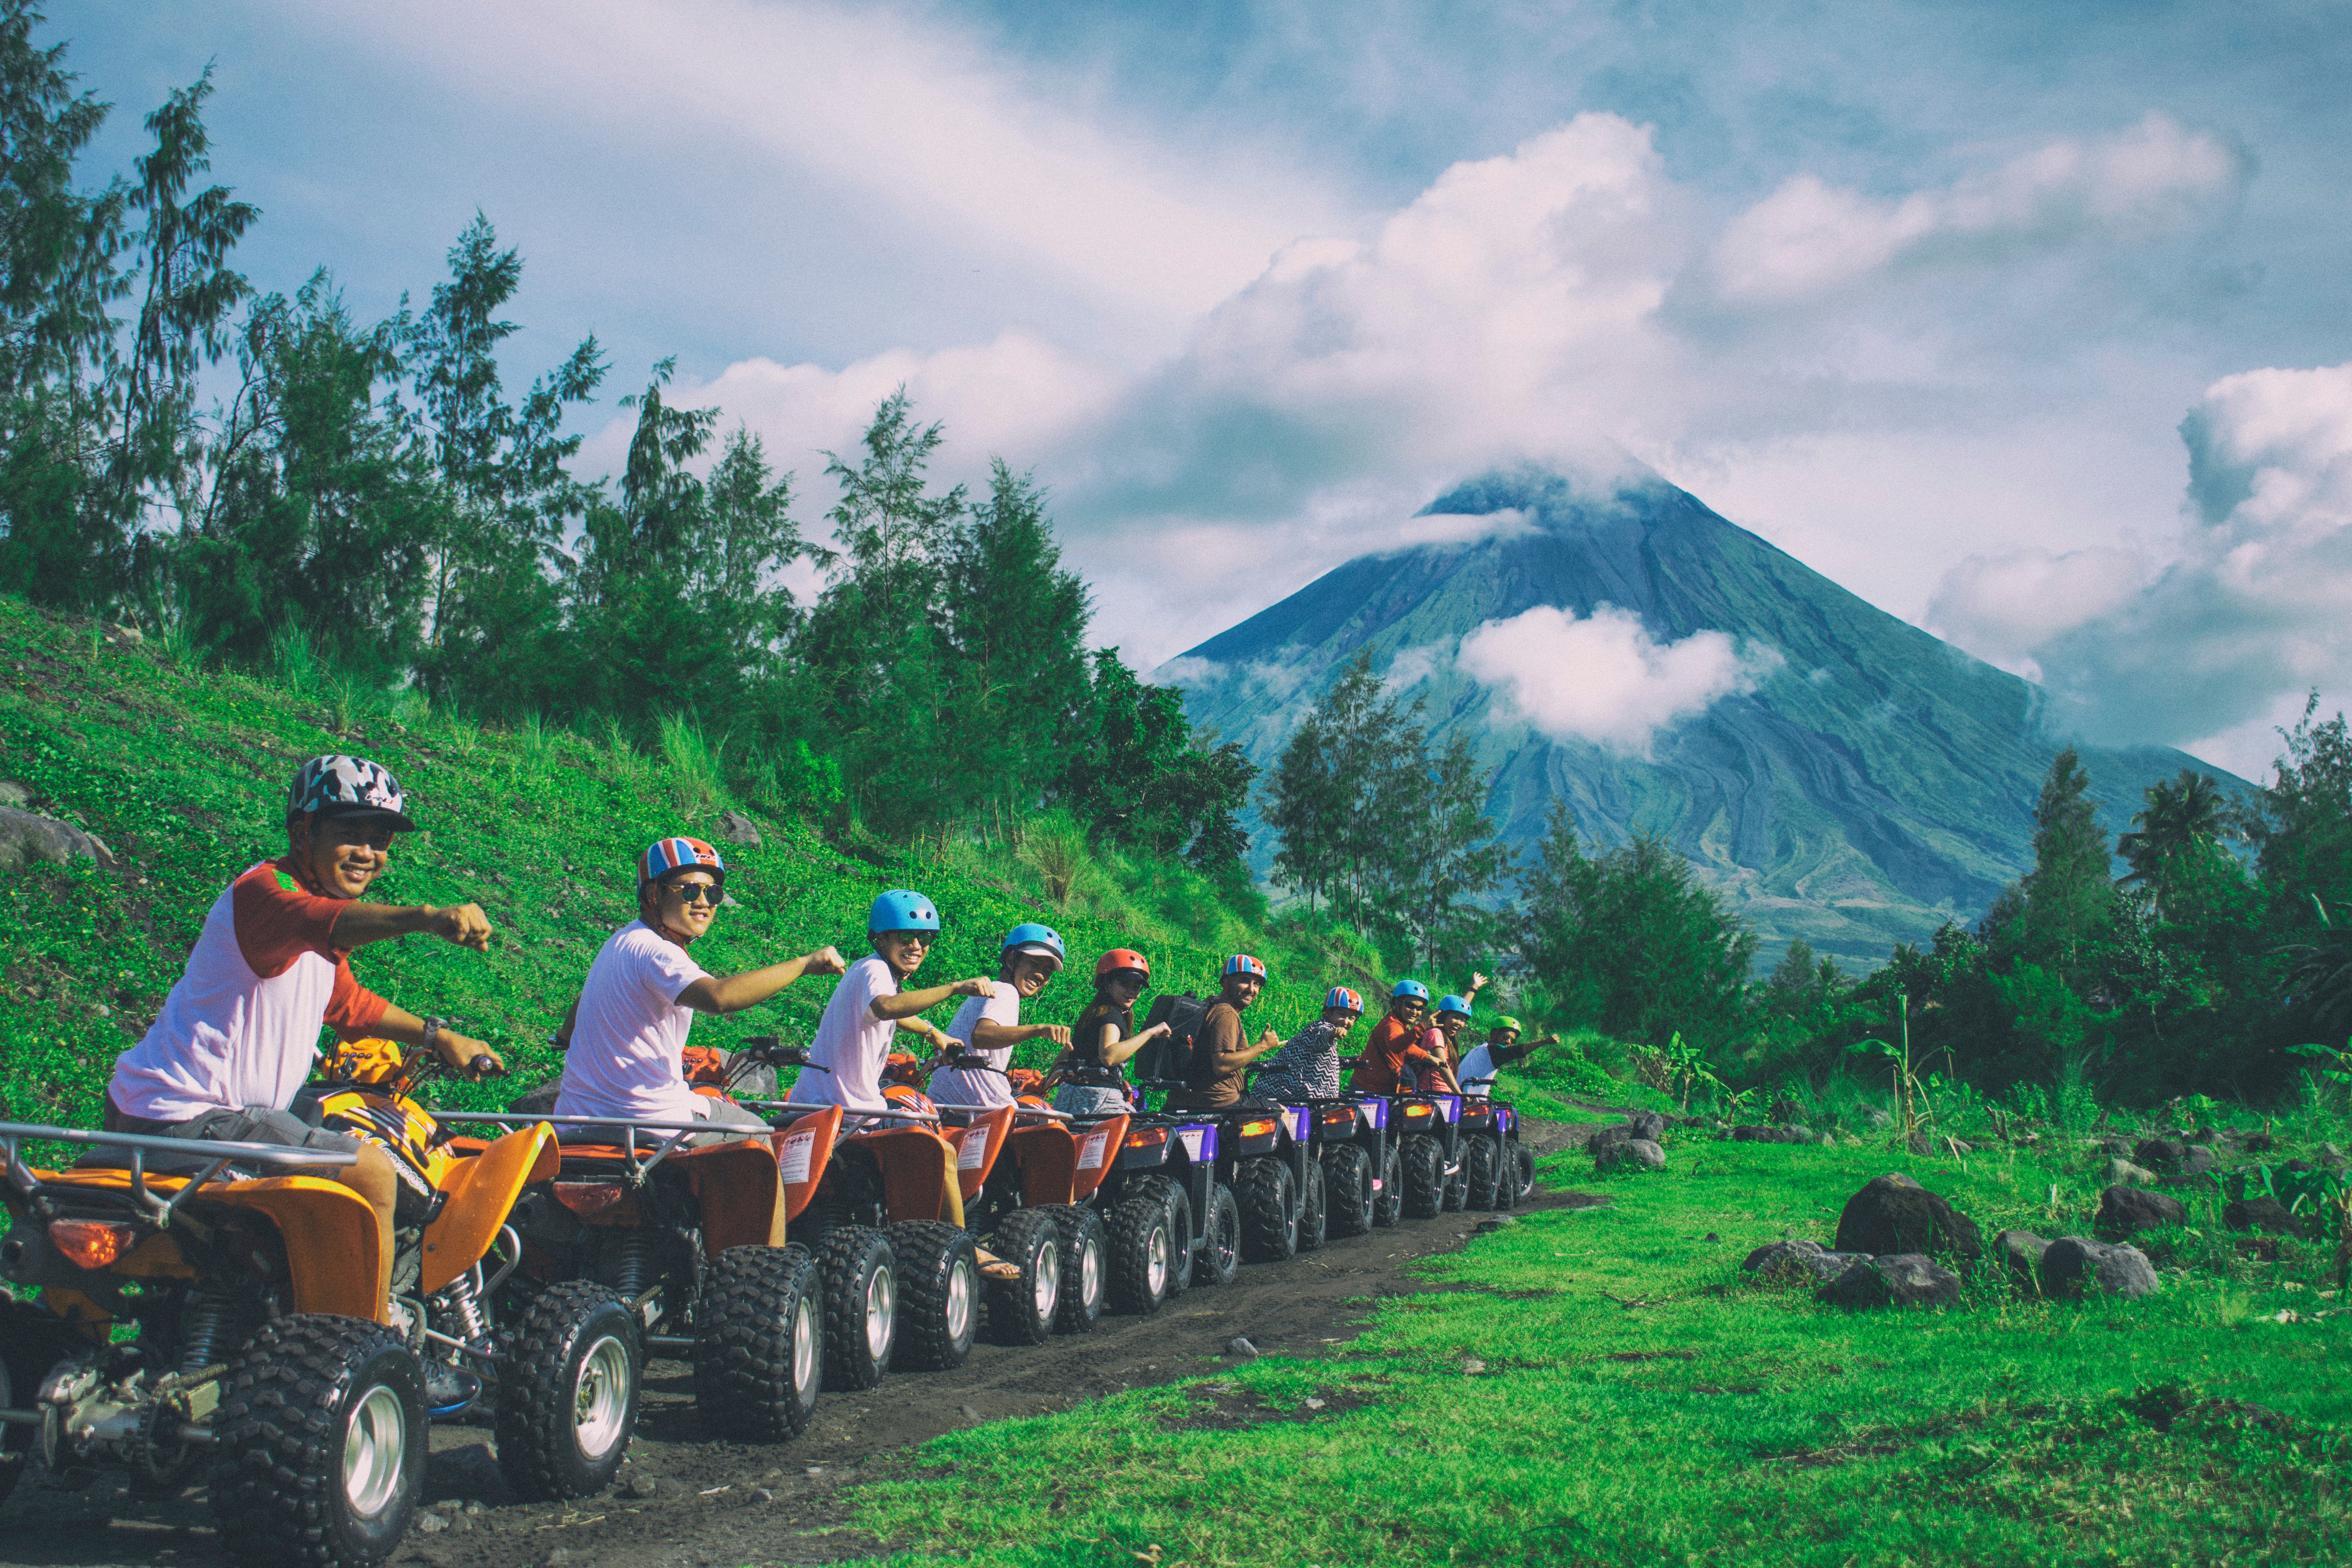 Line of men riding on all terrain vehicles holding out hand in a fist photo